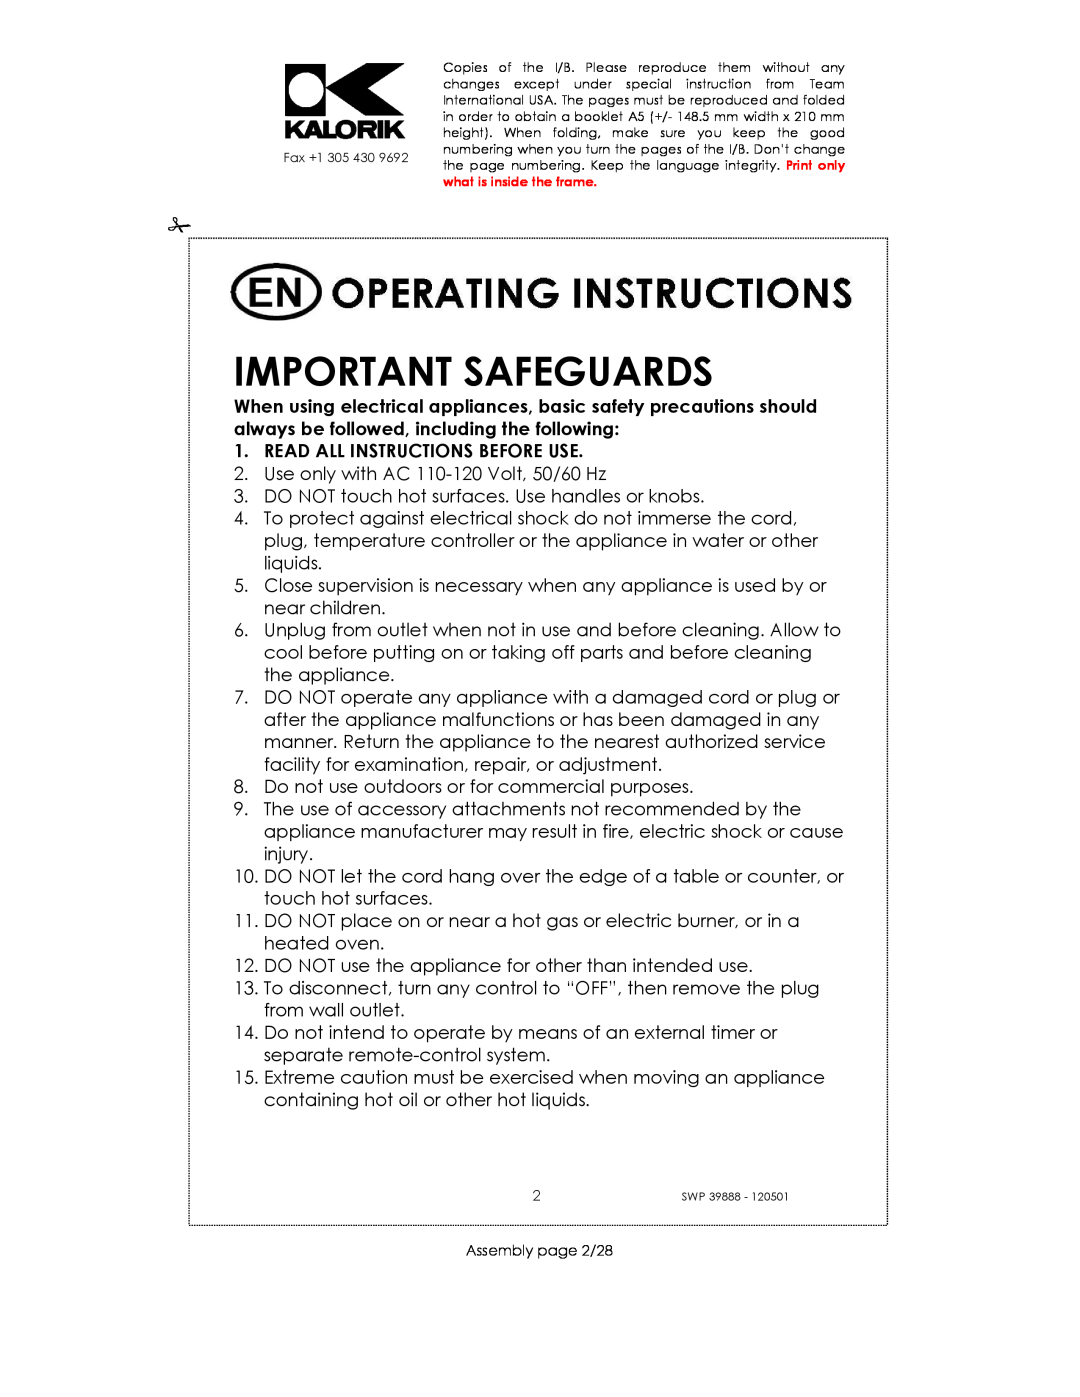 Kalorik SWP 39888 manual Important Safeguards, Read All Instructions Before Use 